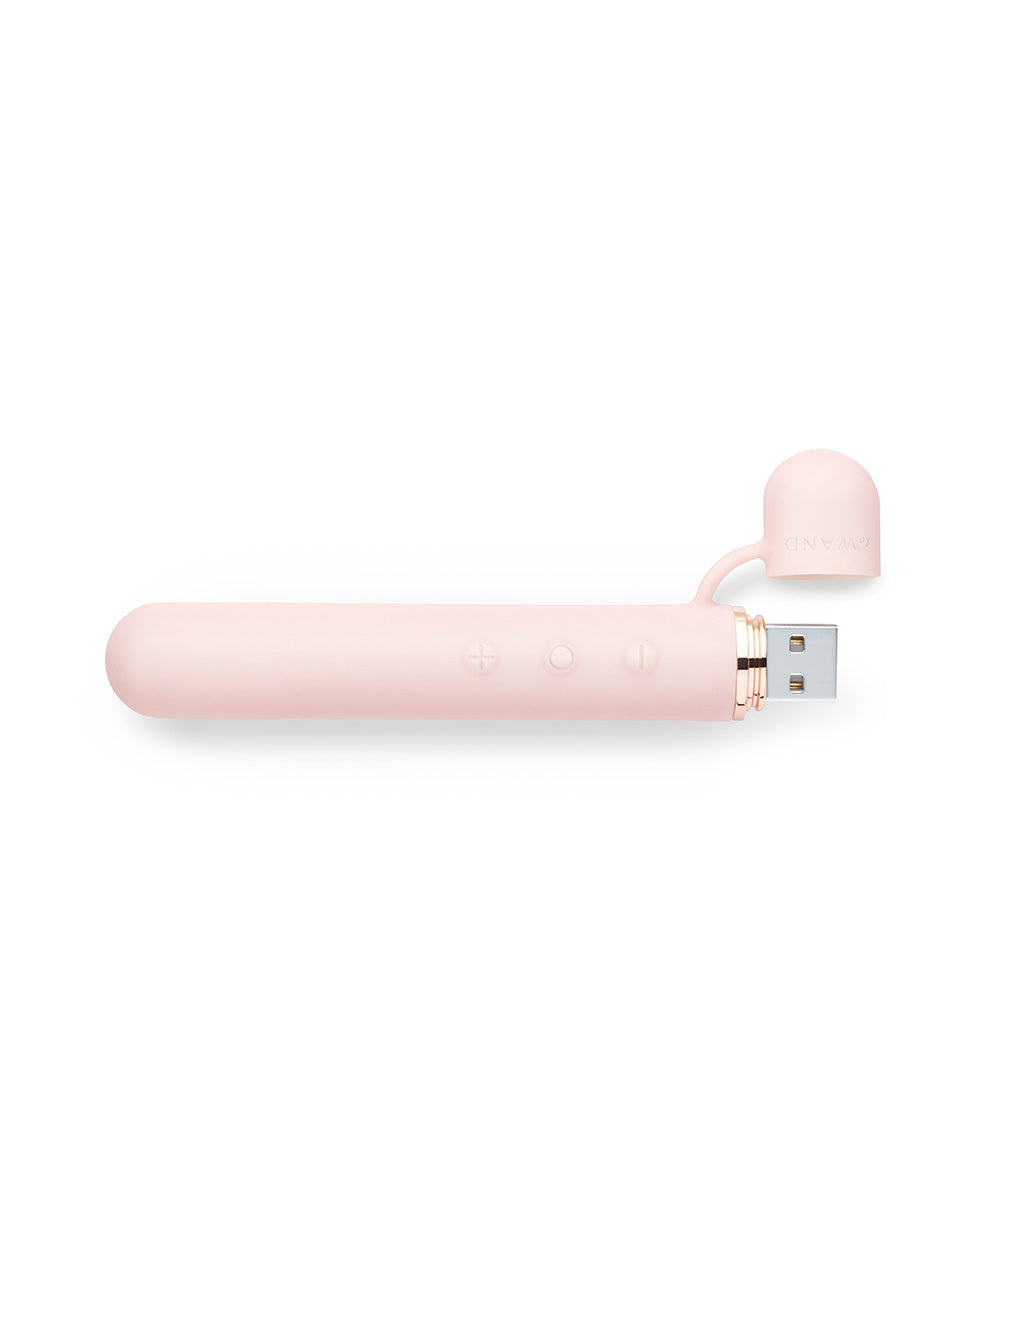 Le Wand Baton Rechargeable Clitoral Vibrator- Rose Gold- Open